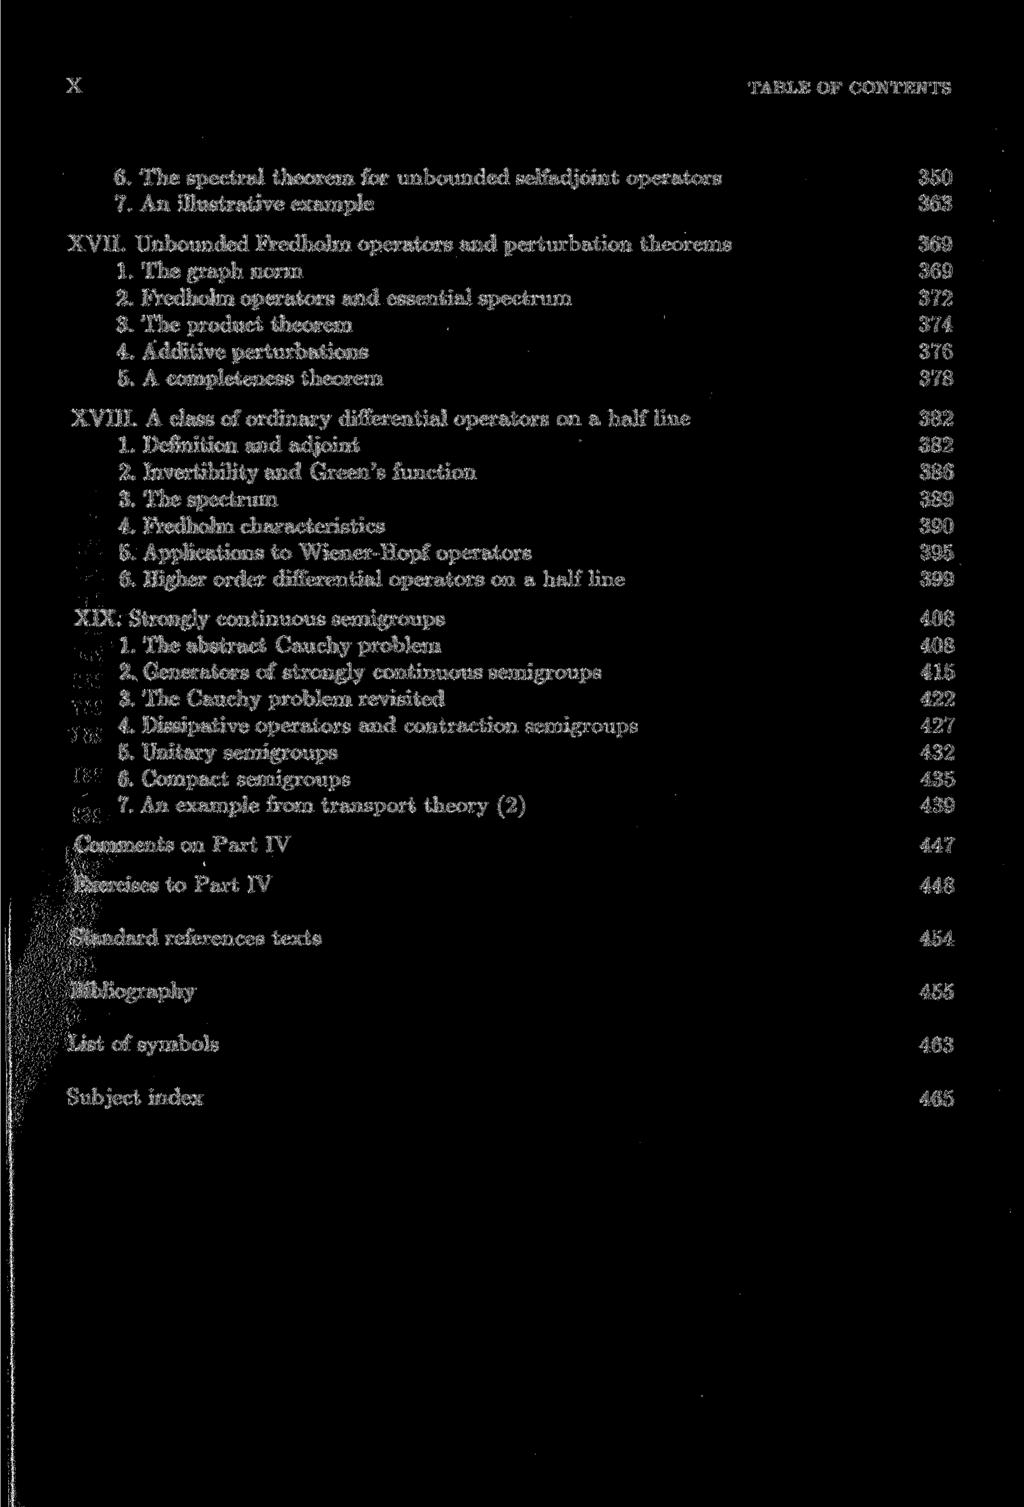 X TABLE OF CONTENTS 6. The spectral theorem for unbounded selfadjoint Operators 350 7. An illustrative example 363 XVII. Unbounded Fredholm Operators and perturbation theorems 369 1.